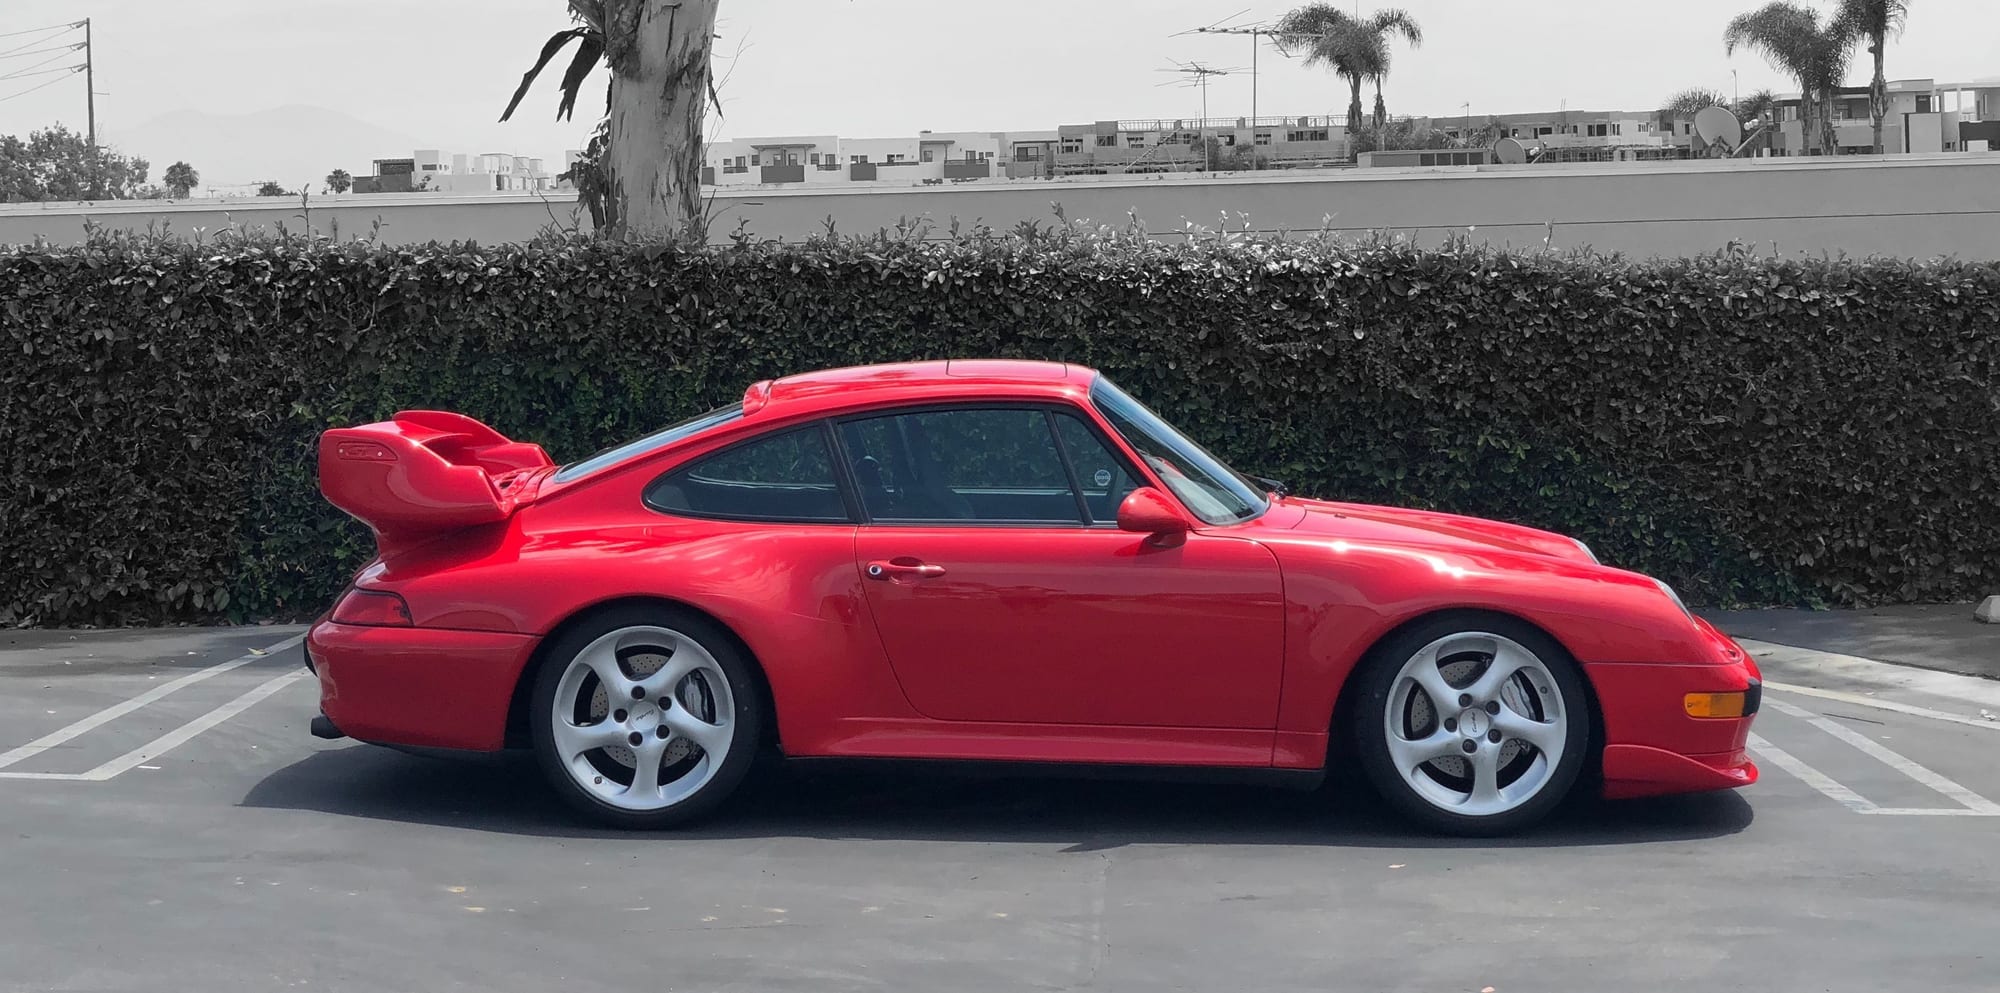 1996 Porsche 911 - 1996 Porsche 993 Twin Turbo in Guards Red with upgrades. - Used - VIN WP0AC2991TS375204 - 53,000 Miles - 6 cyl - AWD - Manual - Coupe - Red - Costa Mesa, CO 92626, United States